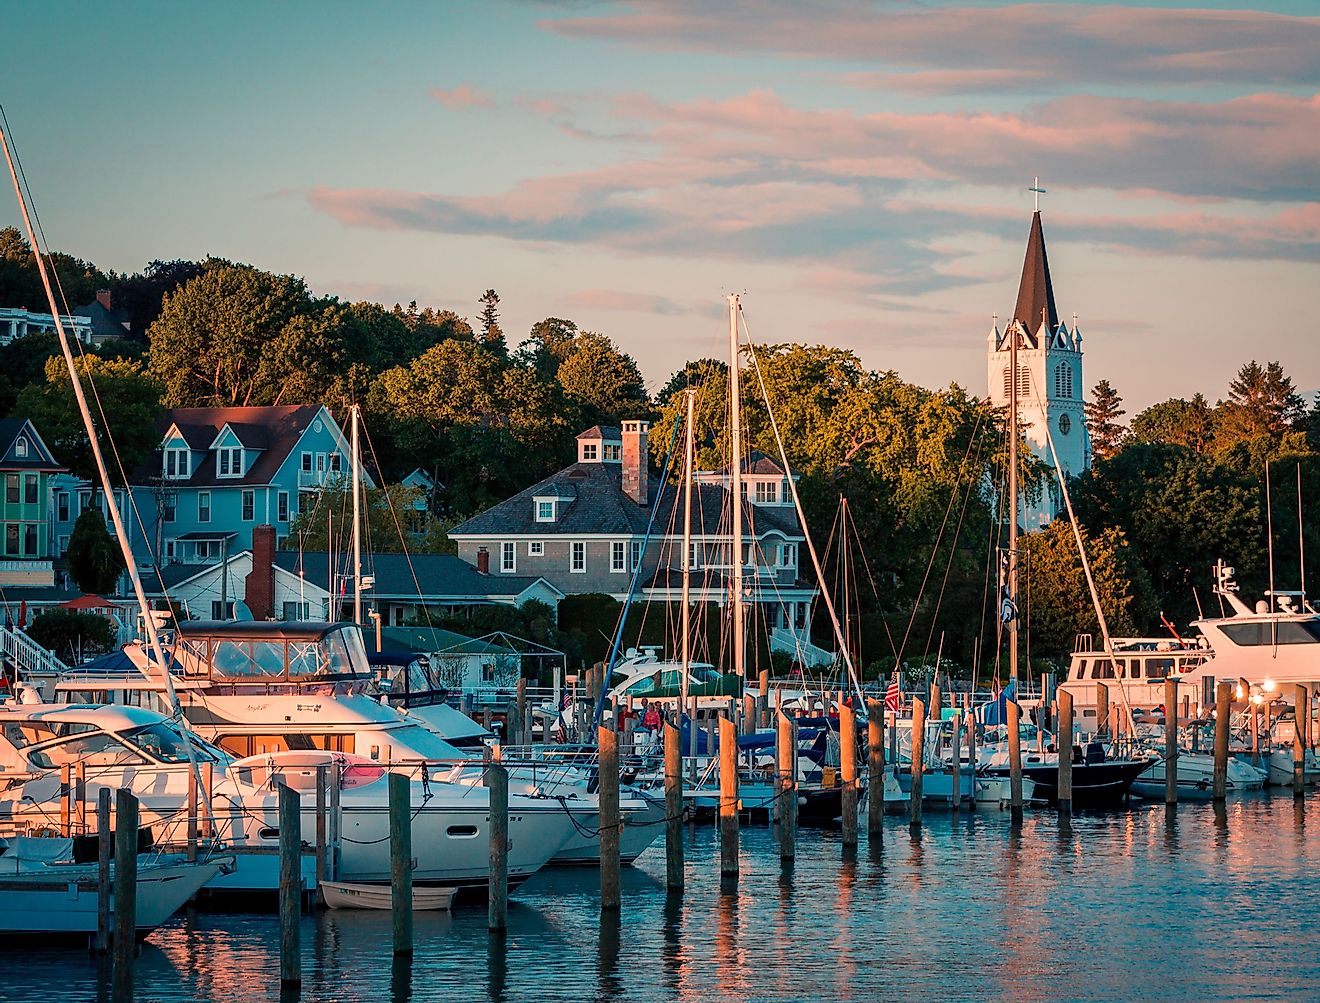 Mackinac Island with Saint Anne's church and Victorian houses. Image credit Michael Deemer via Shutterstock